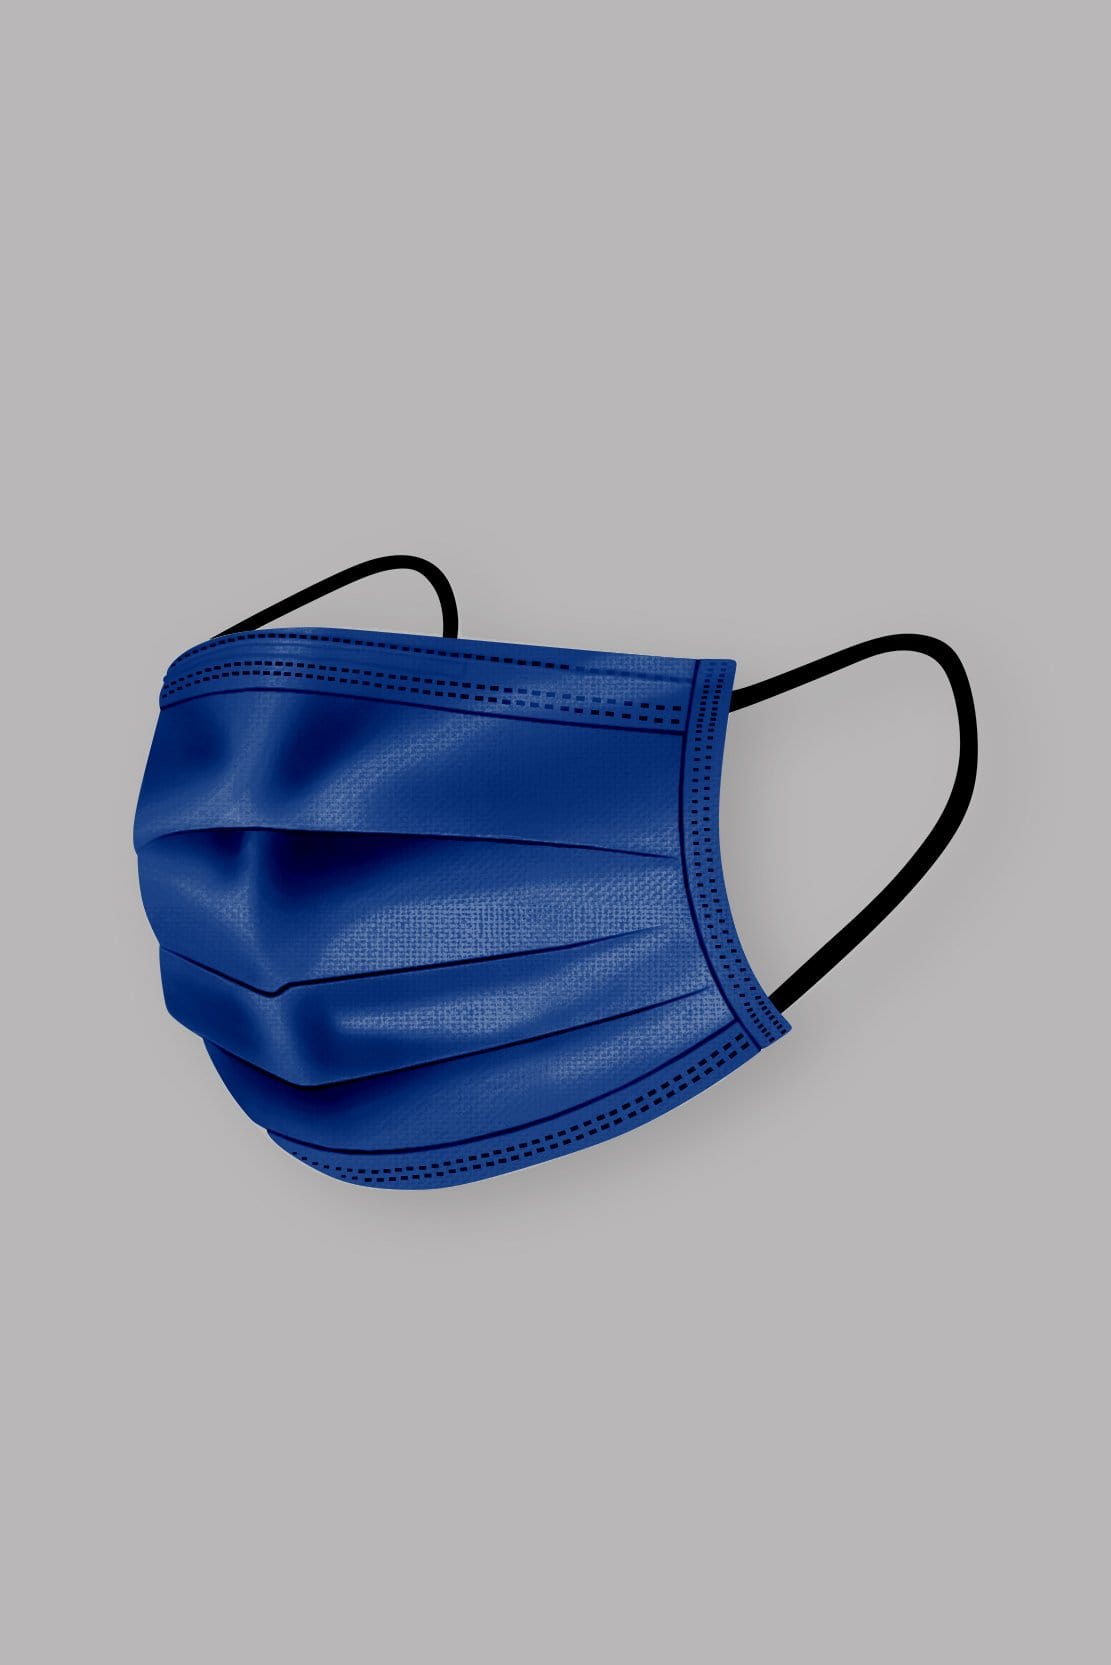 Stylish Navy Blue Pleated face mask, with soft black ear loops and high quality fabric. 